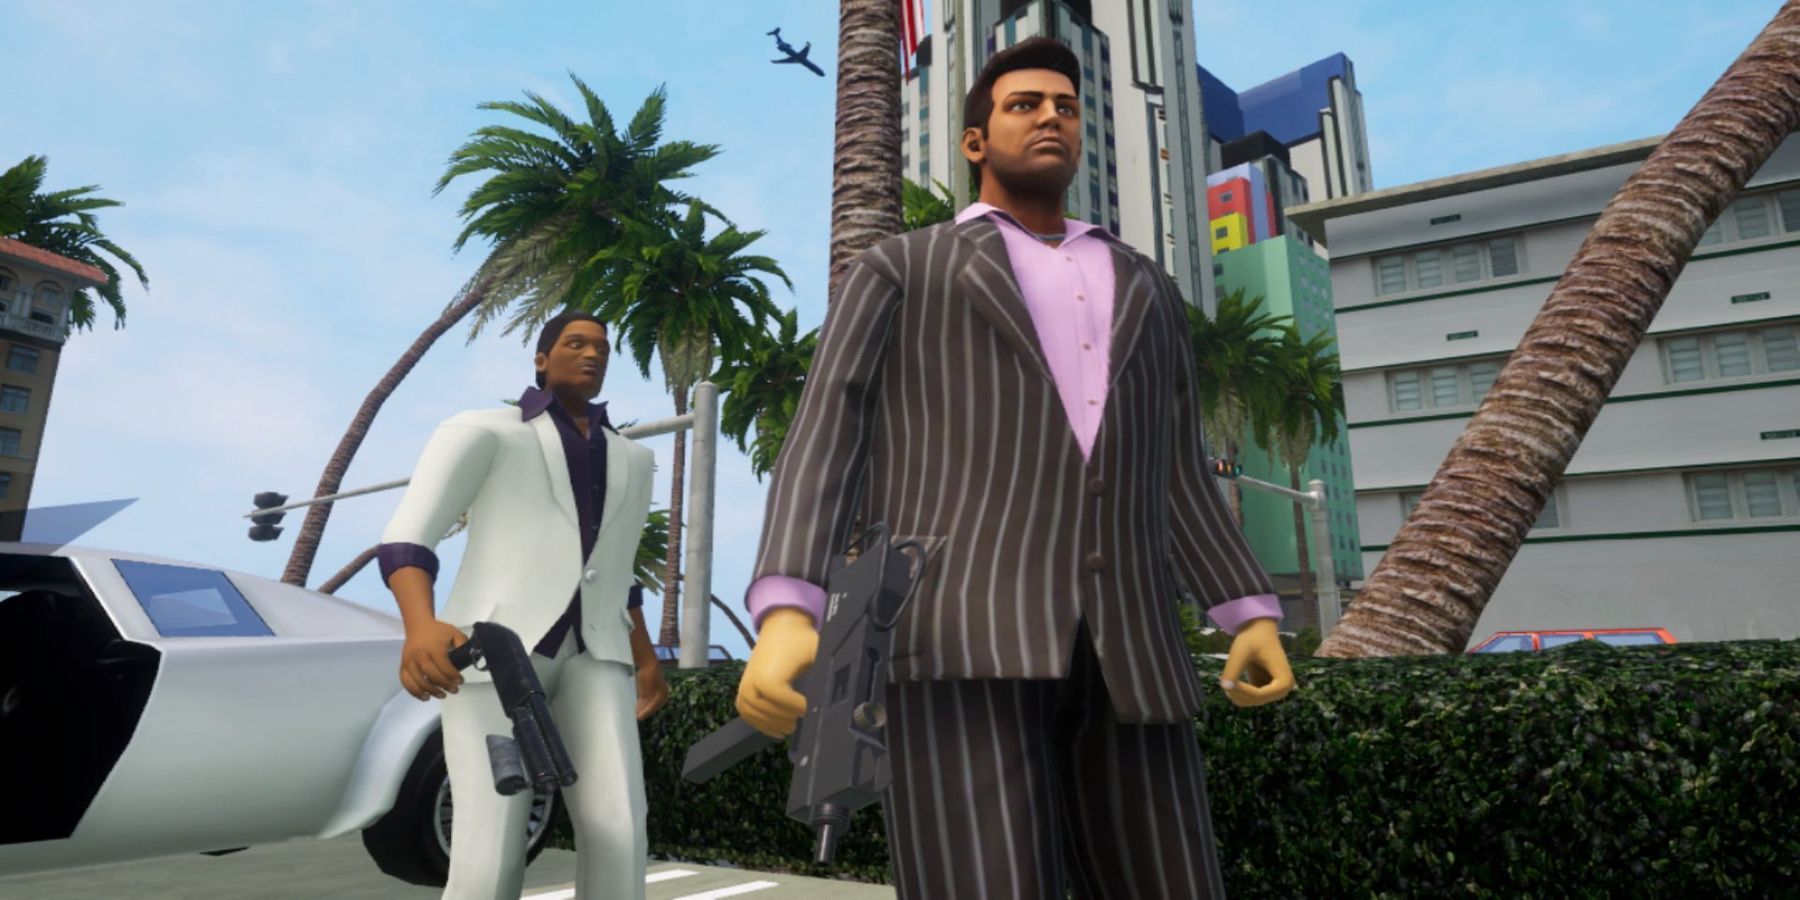 The-GTA-Trilogy-The-Definitive-Edition-Vice-City-Switch-Screen-1-74ff_1800x900